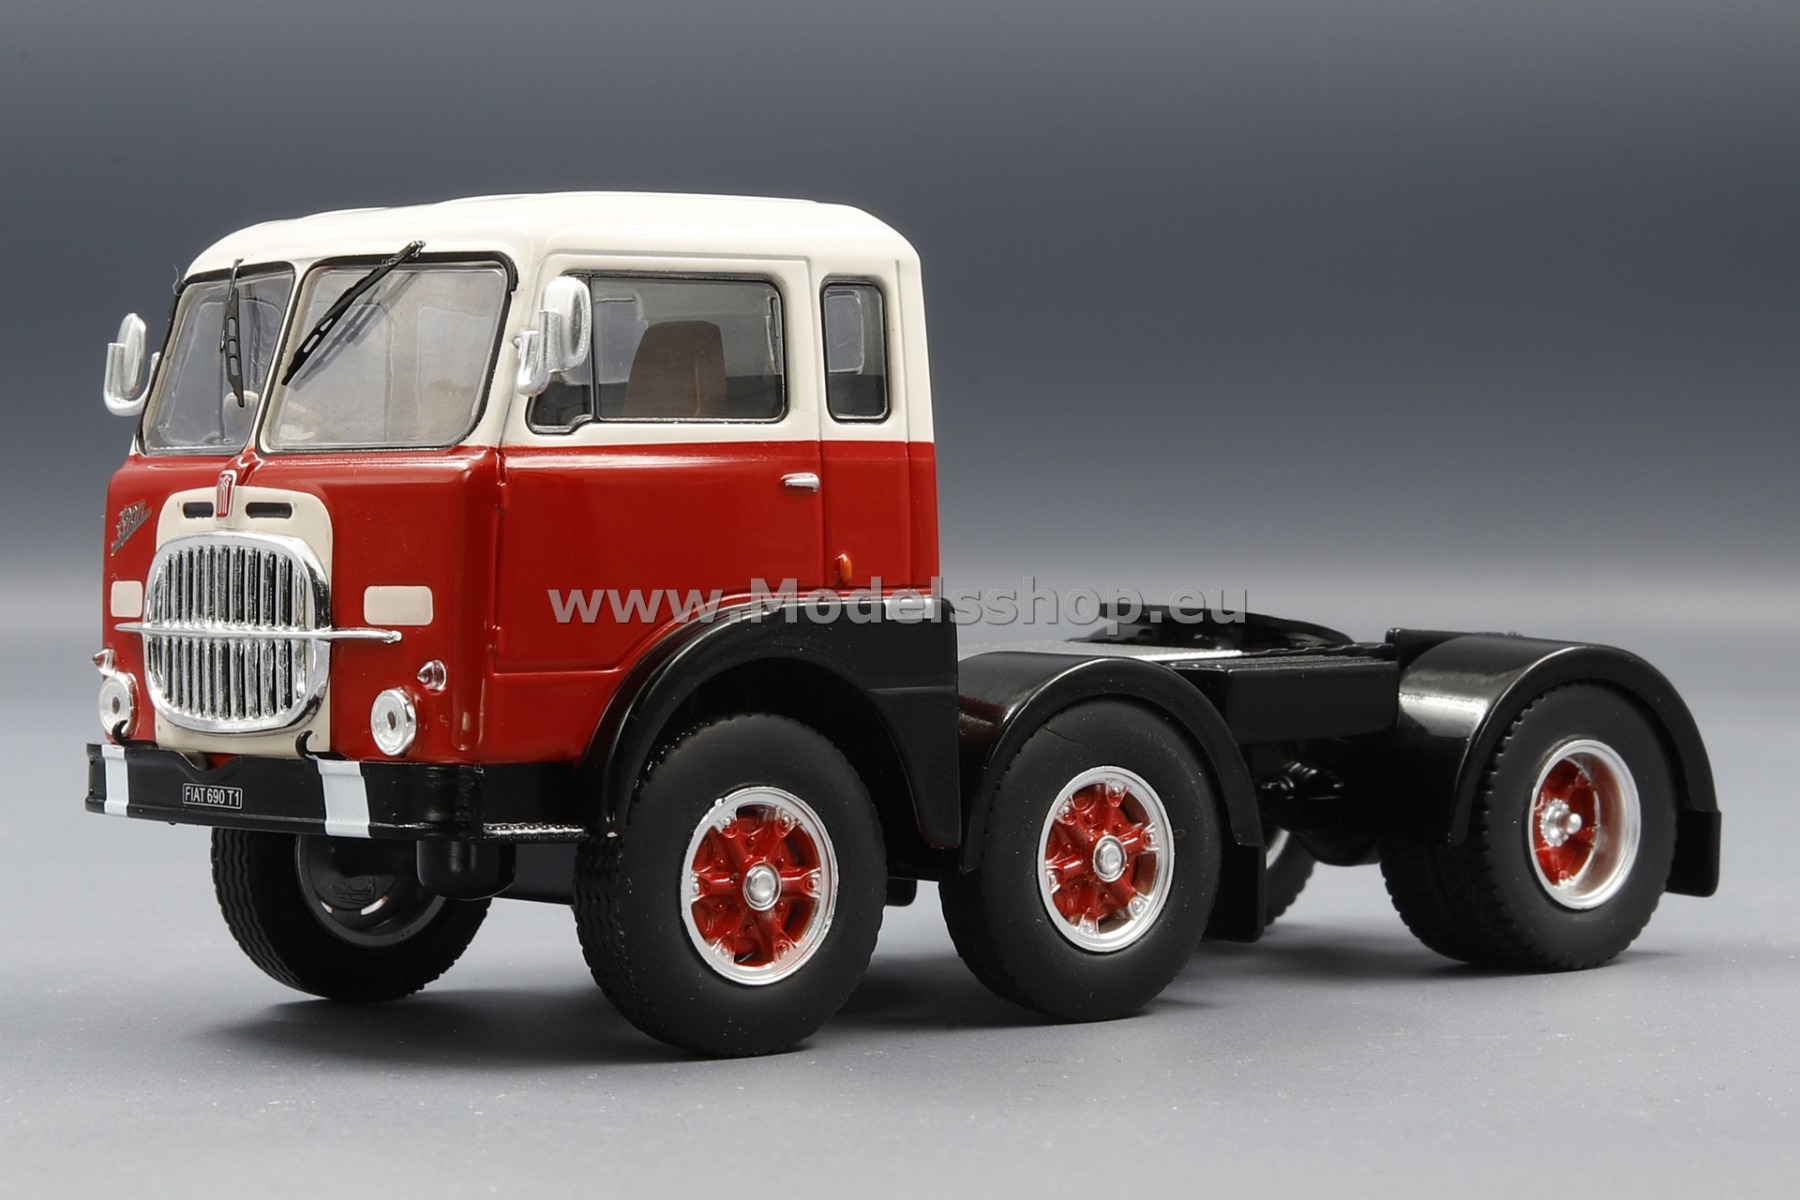 Fiat 690 T1 tractor truck, 1961 /red - white/